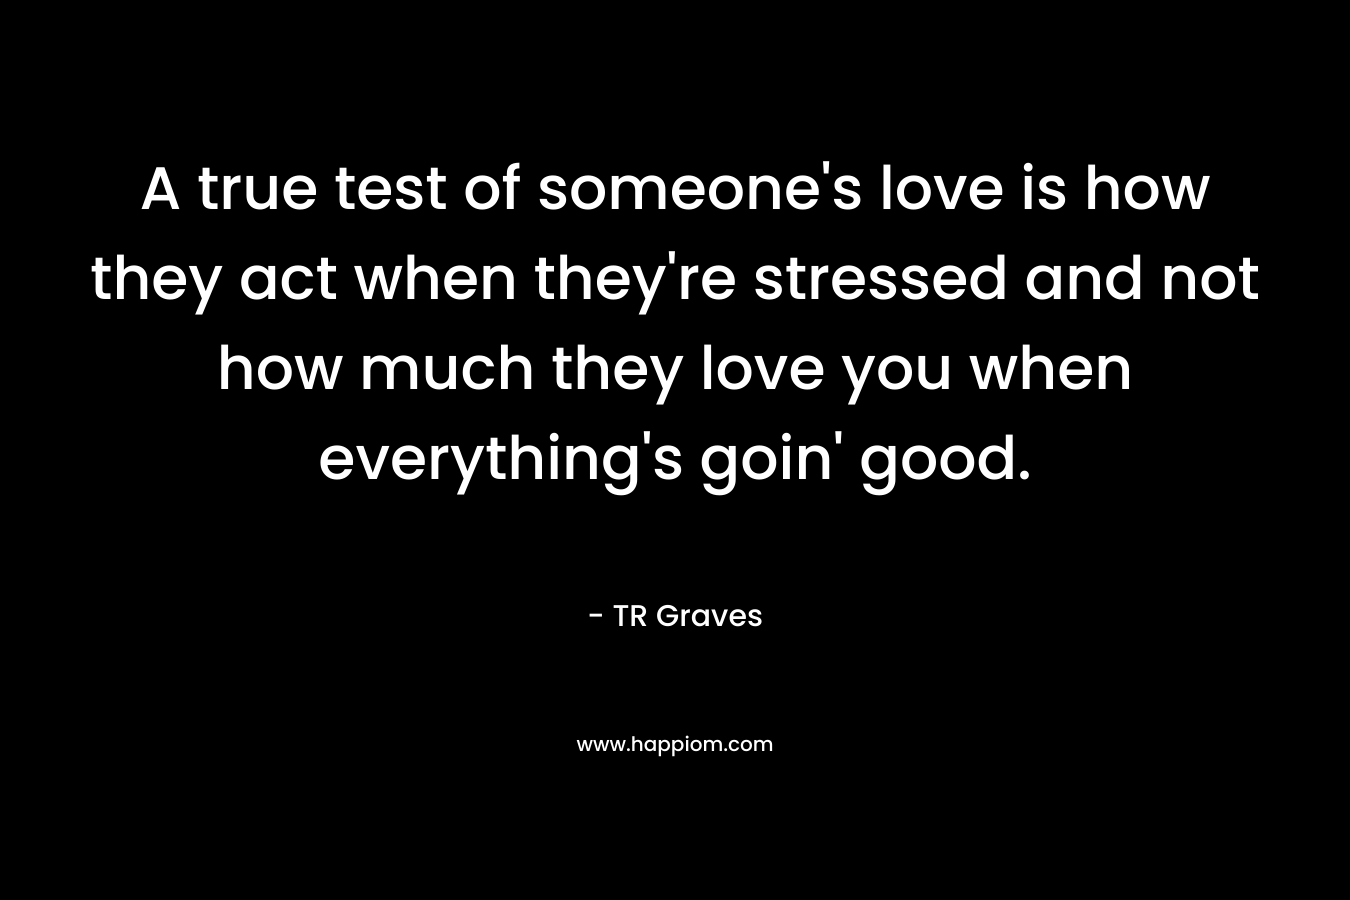 A true test of someone’s love is how they act when they’re stressed and not how much they love you when everything’s goin’ good. – TR Graves